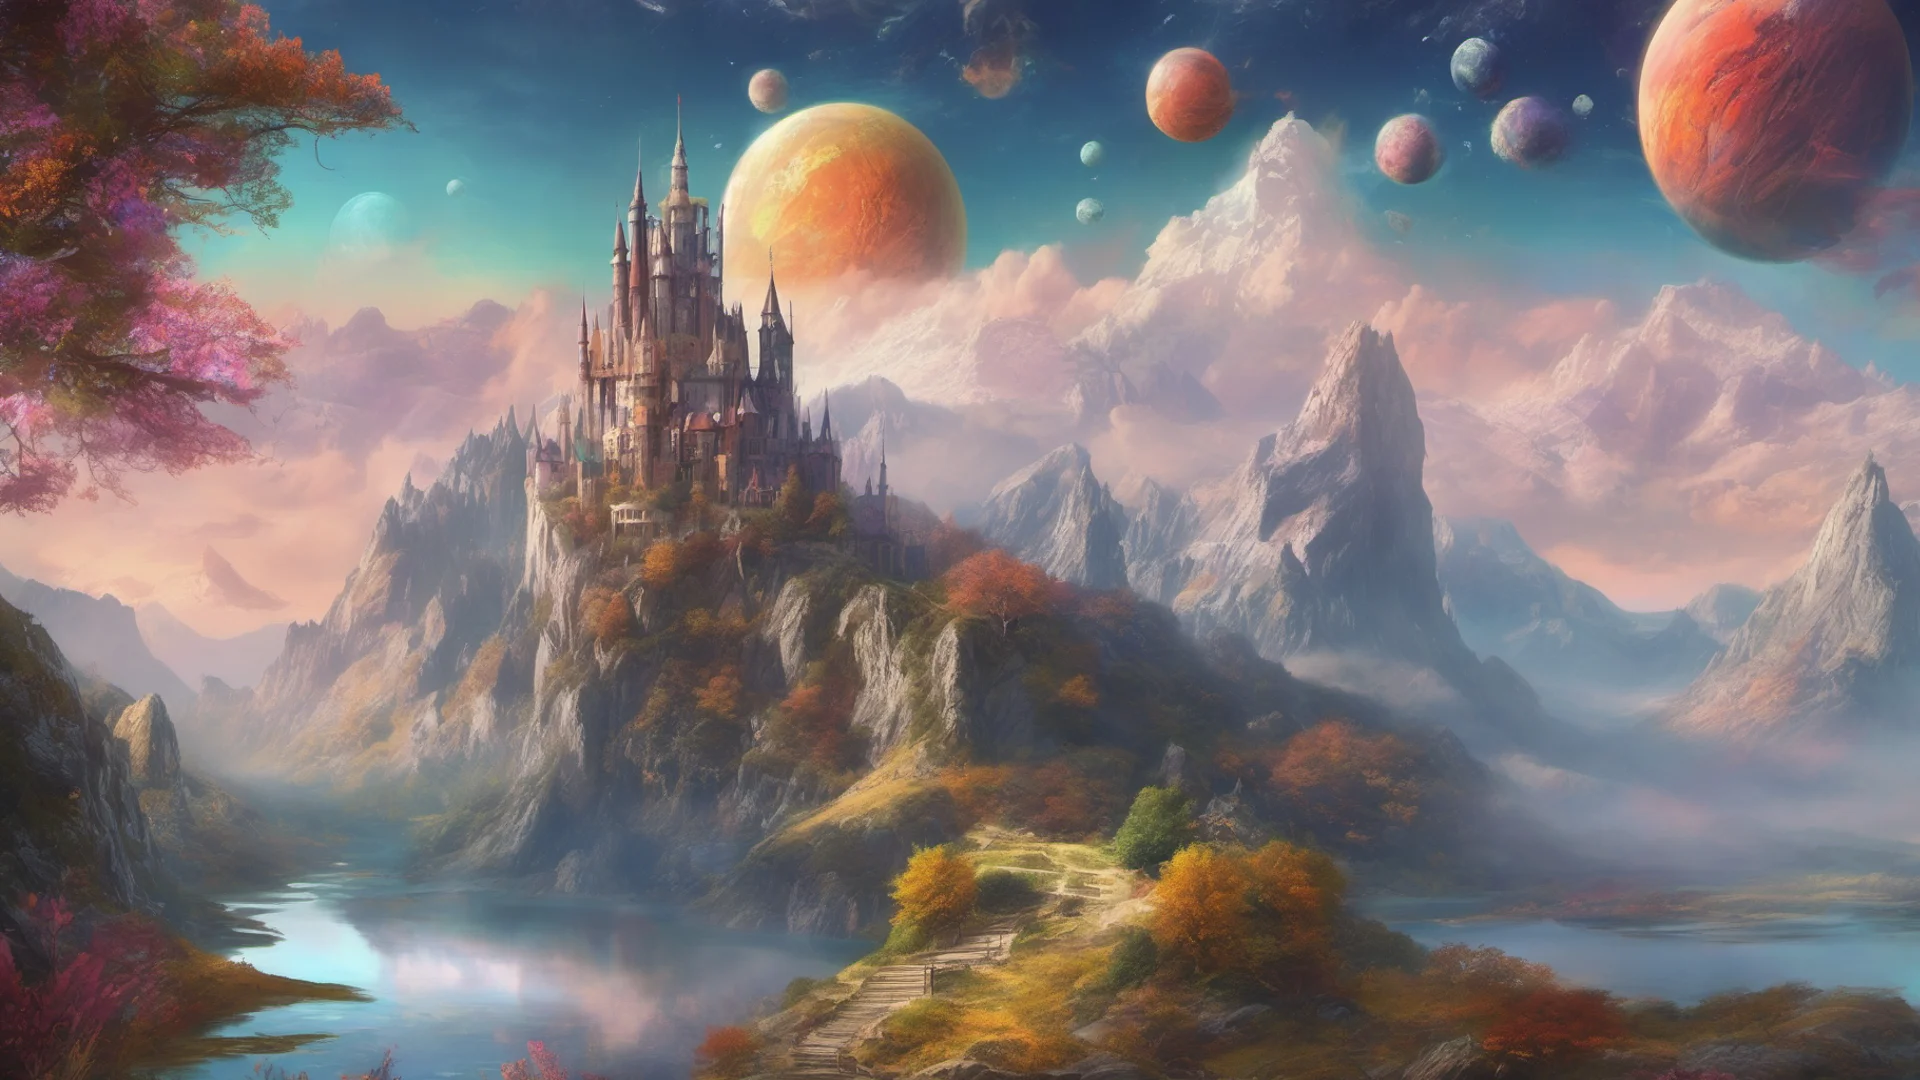 aiepic fantasy environment castle on tall mountain lakes sky with many colorful planets   wide